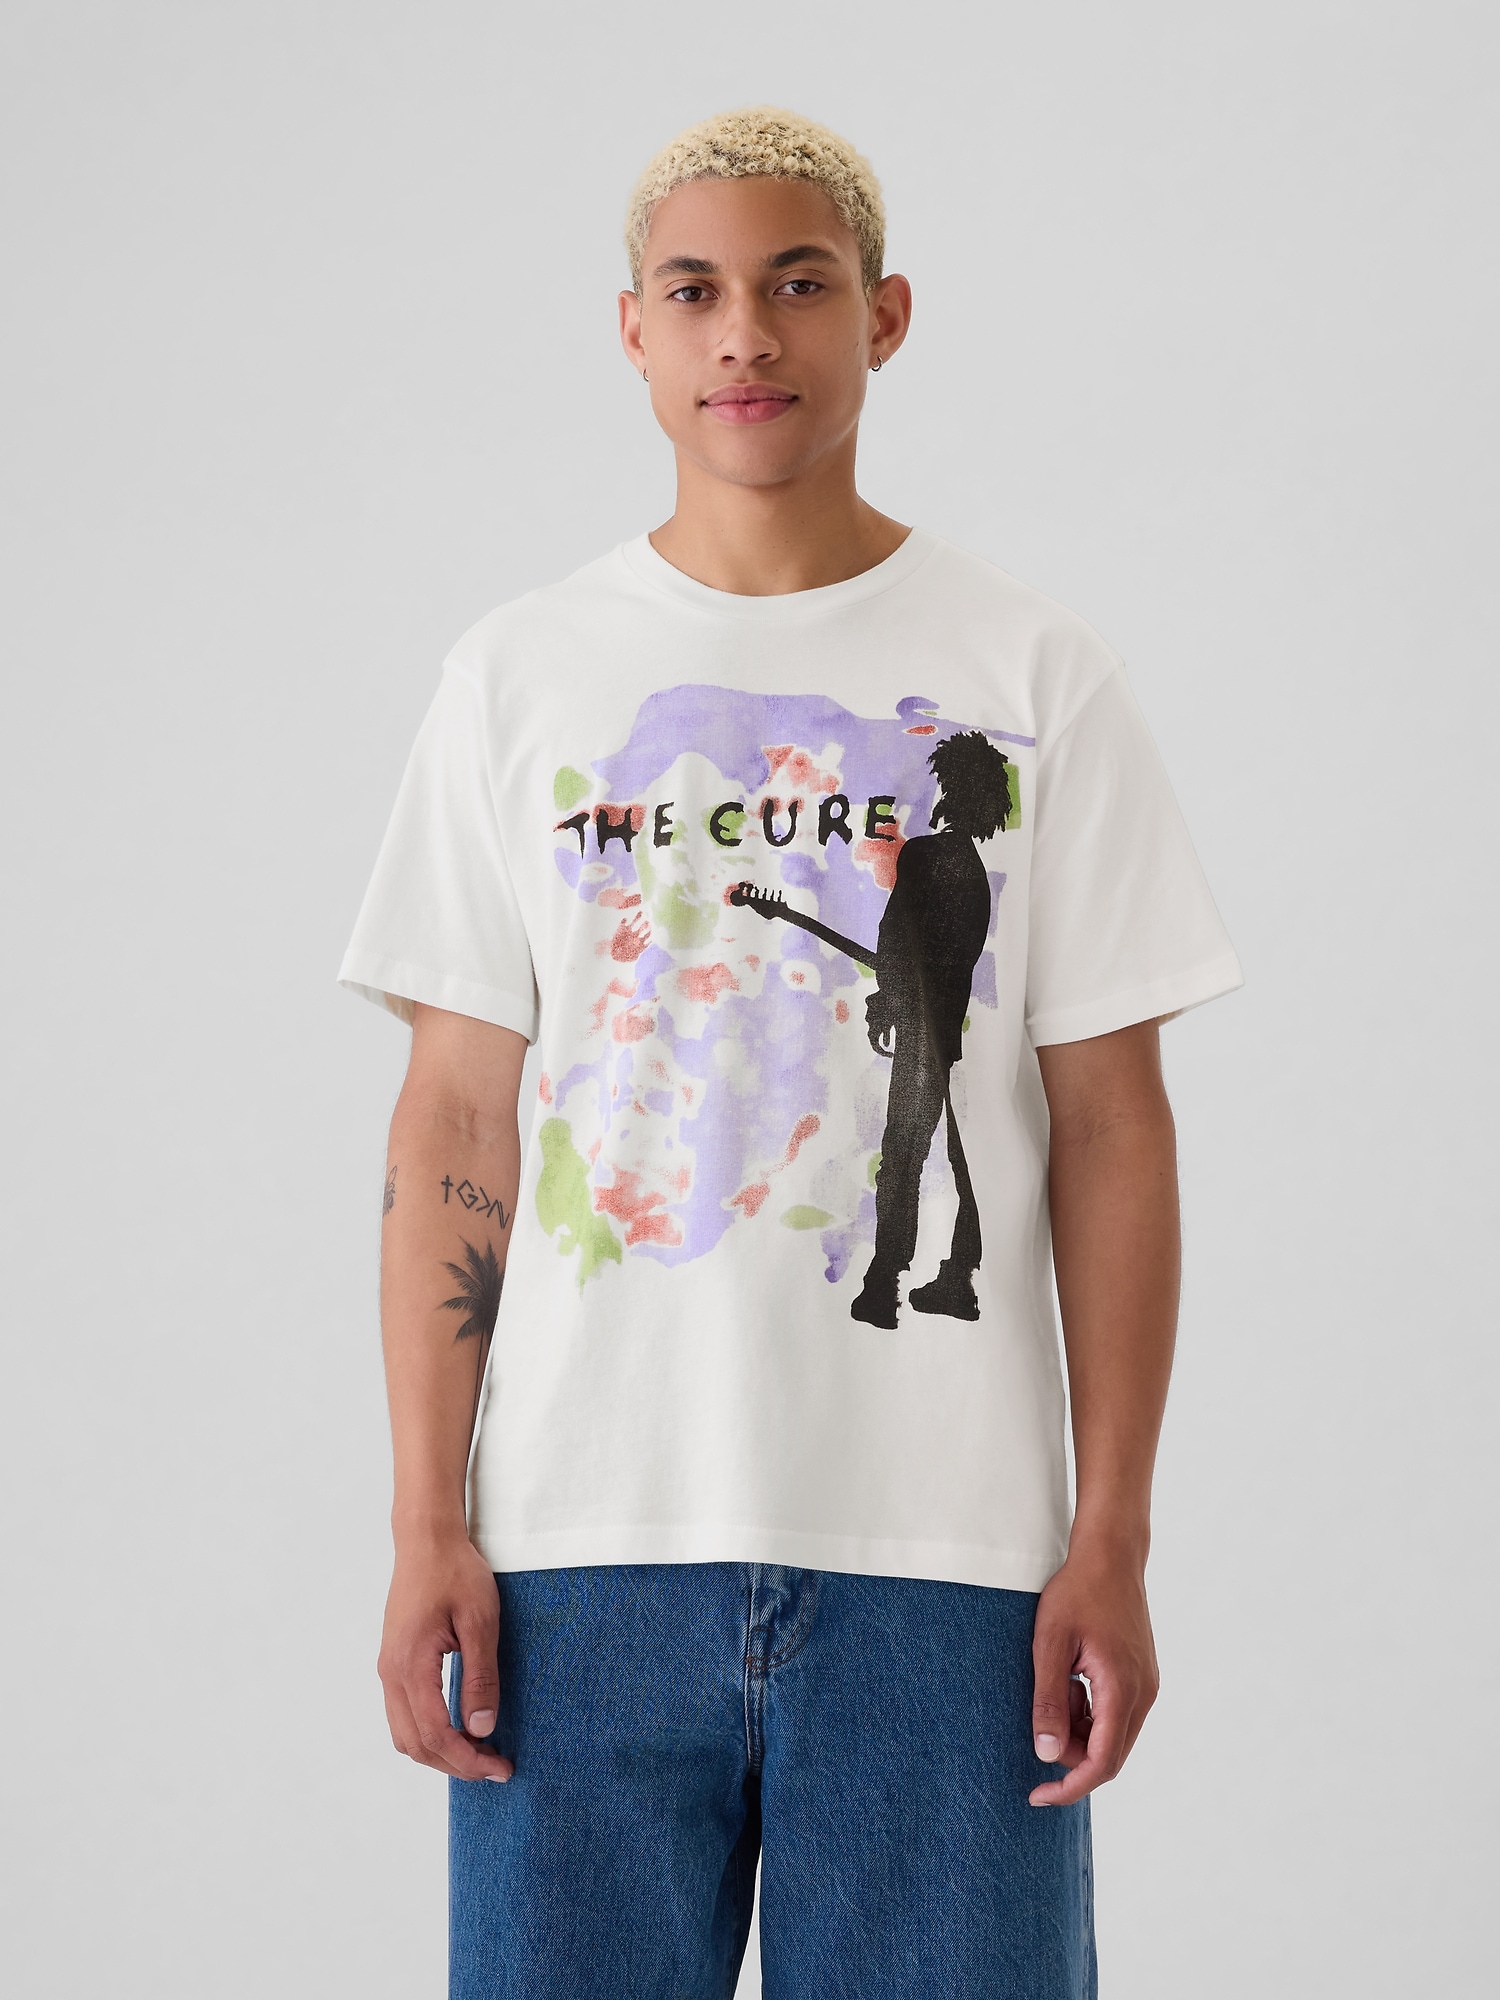 The Cure Graphic T-Shirt